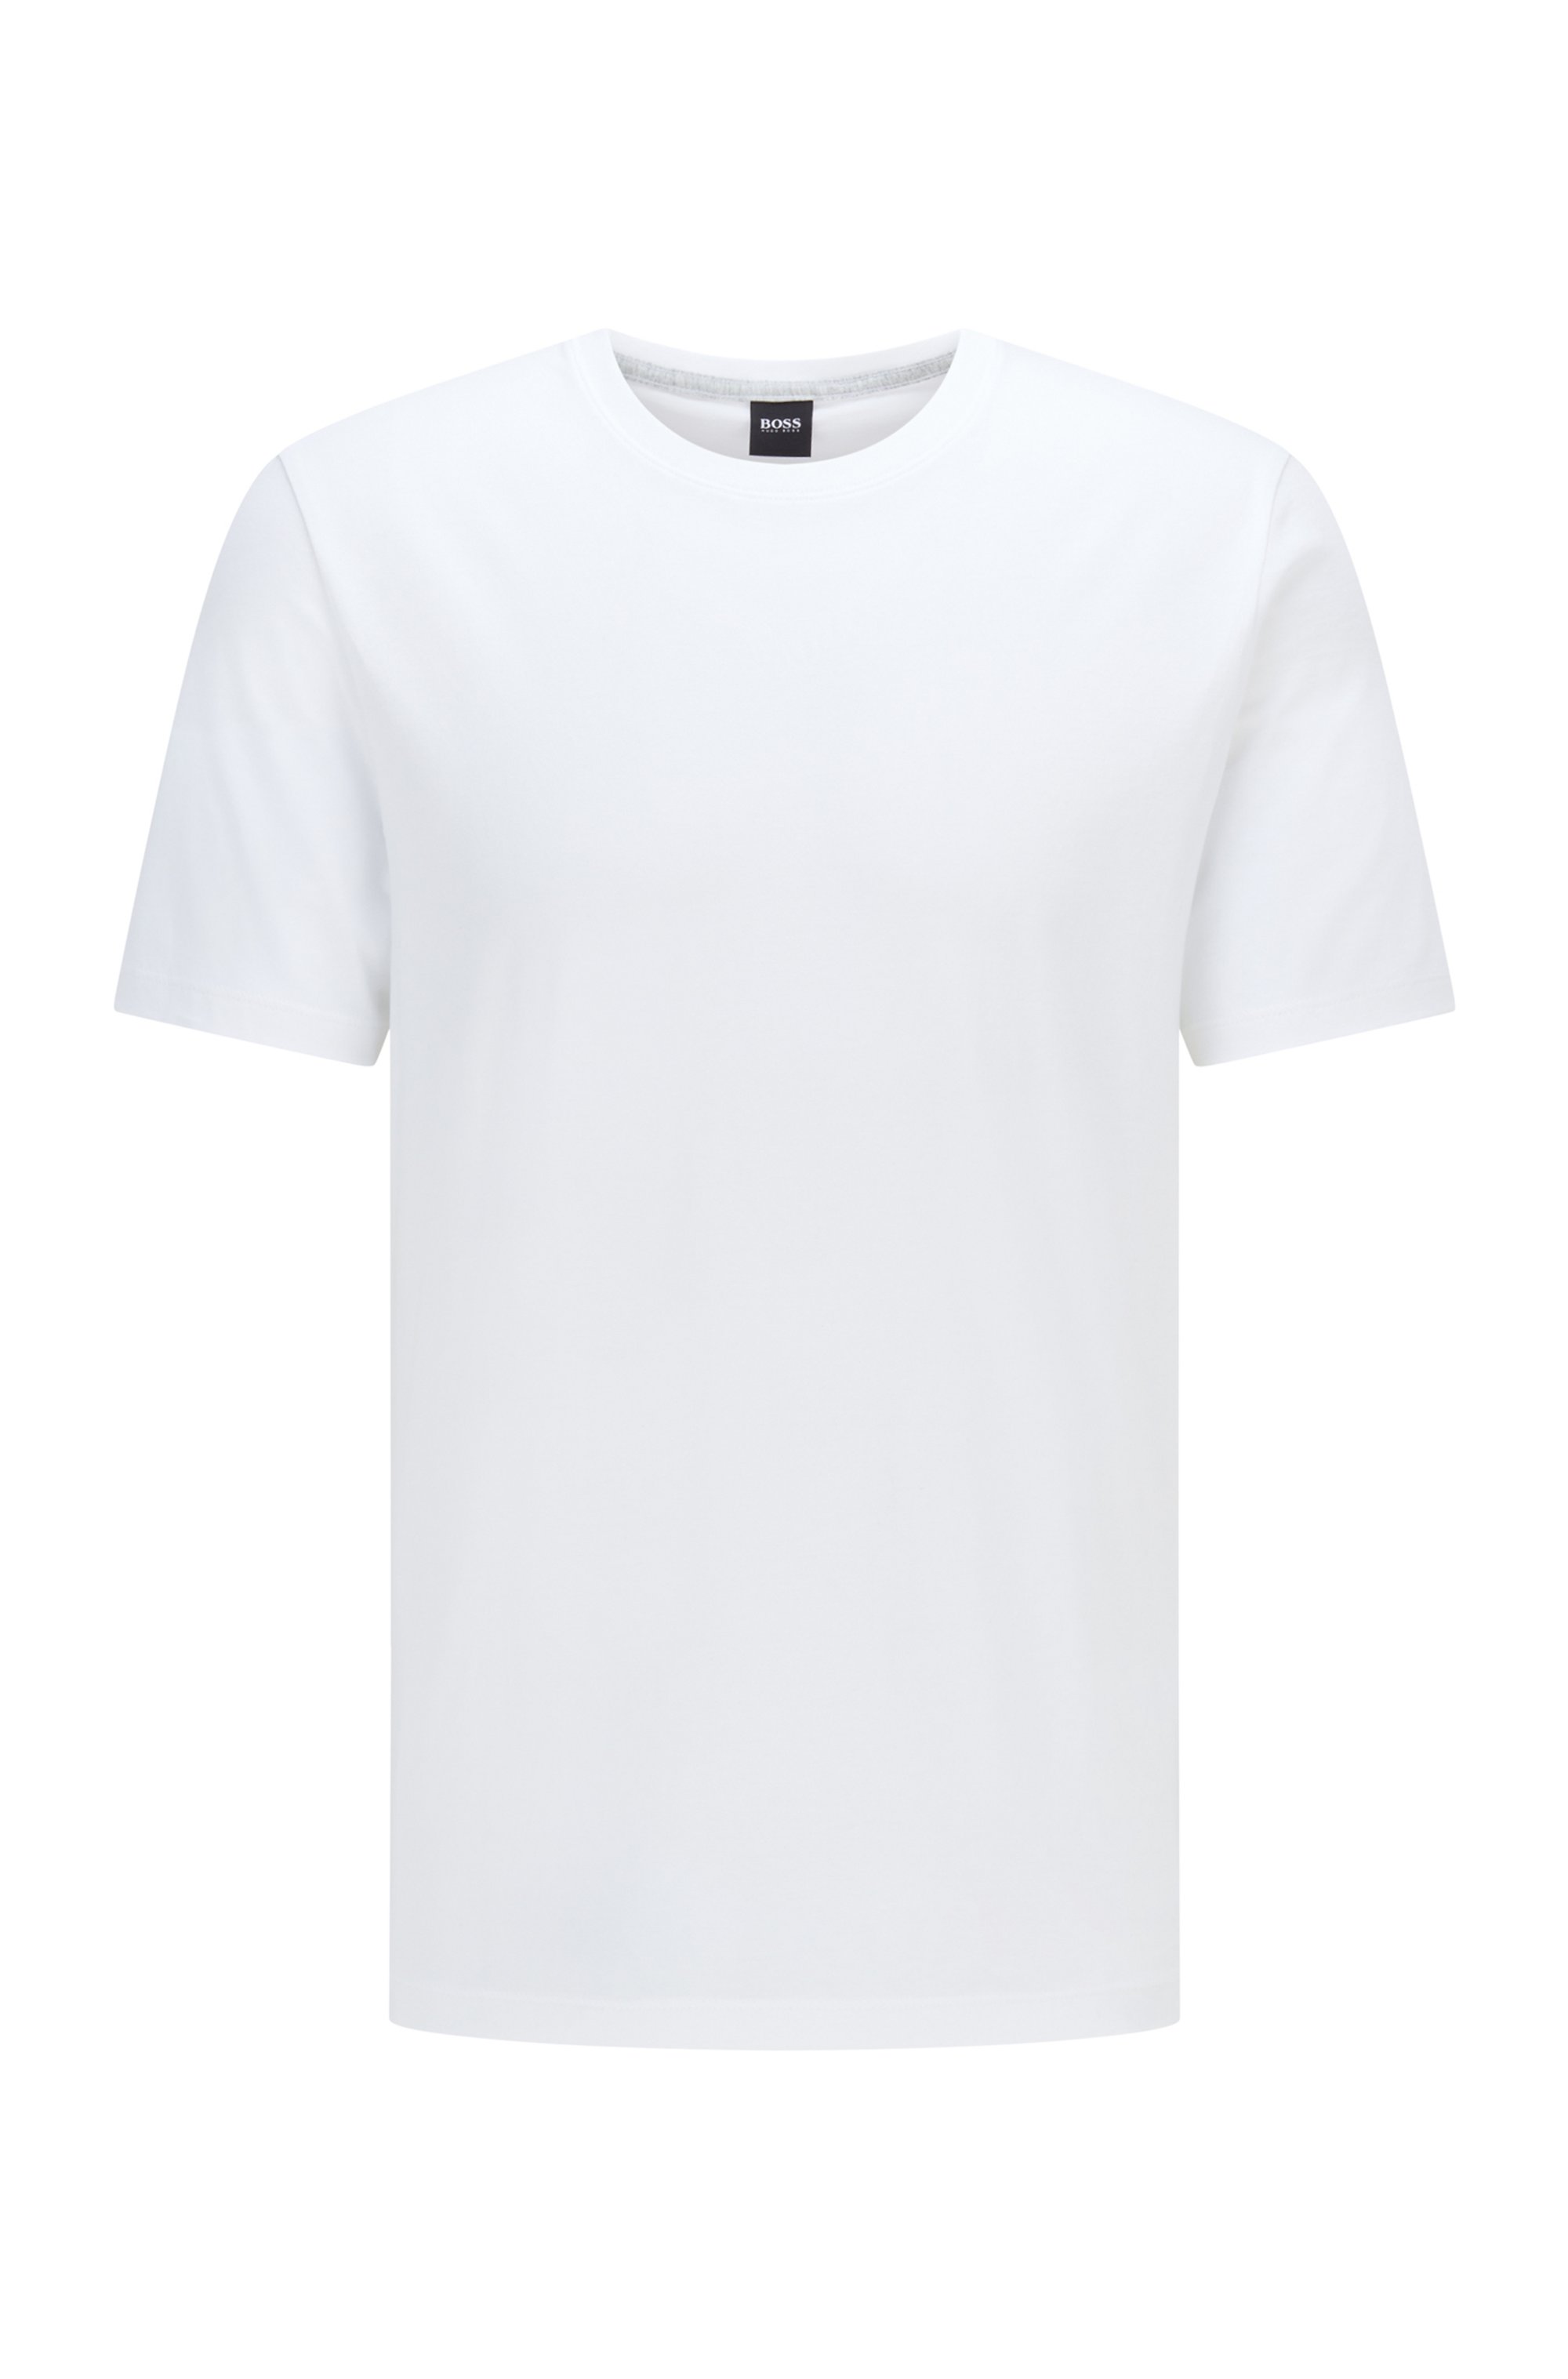 Crew-neck T-shirt in pure cotton with liquid finishing, White